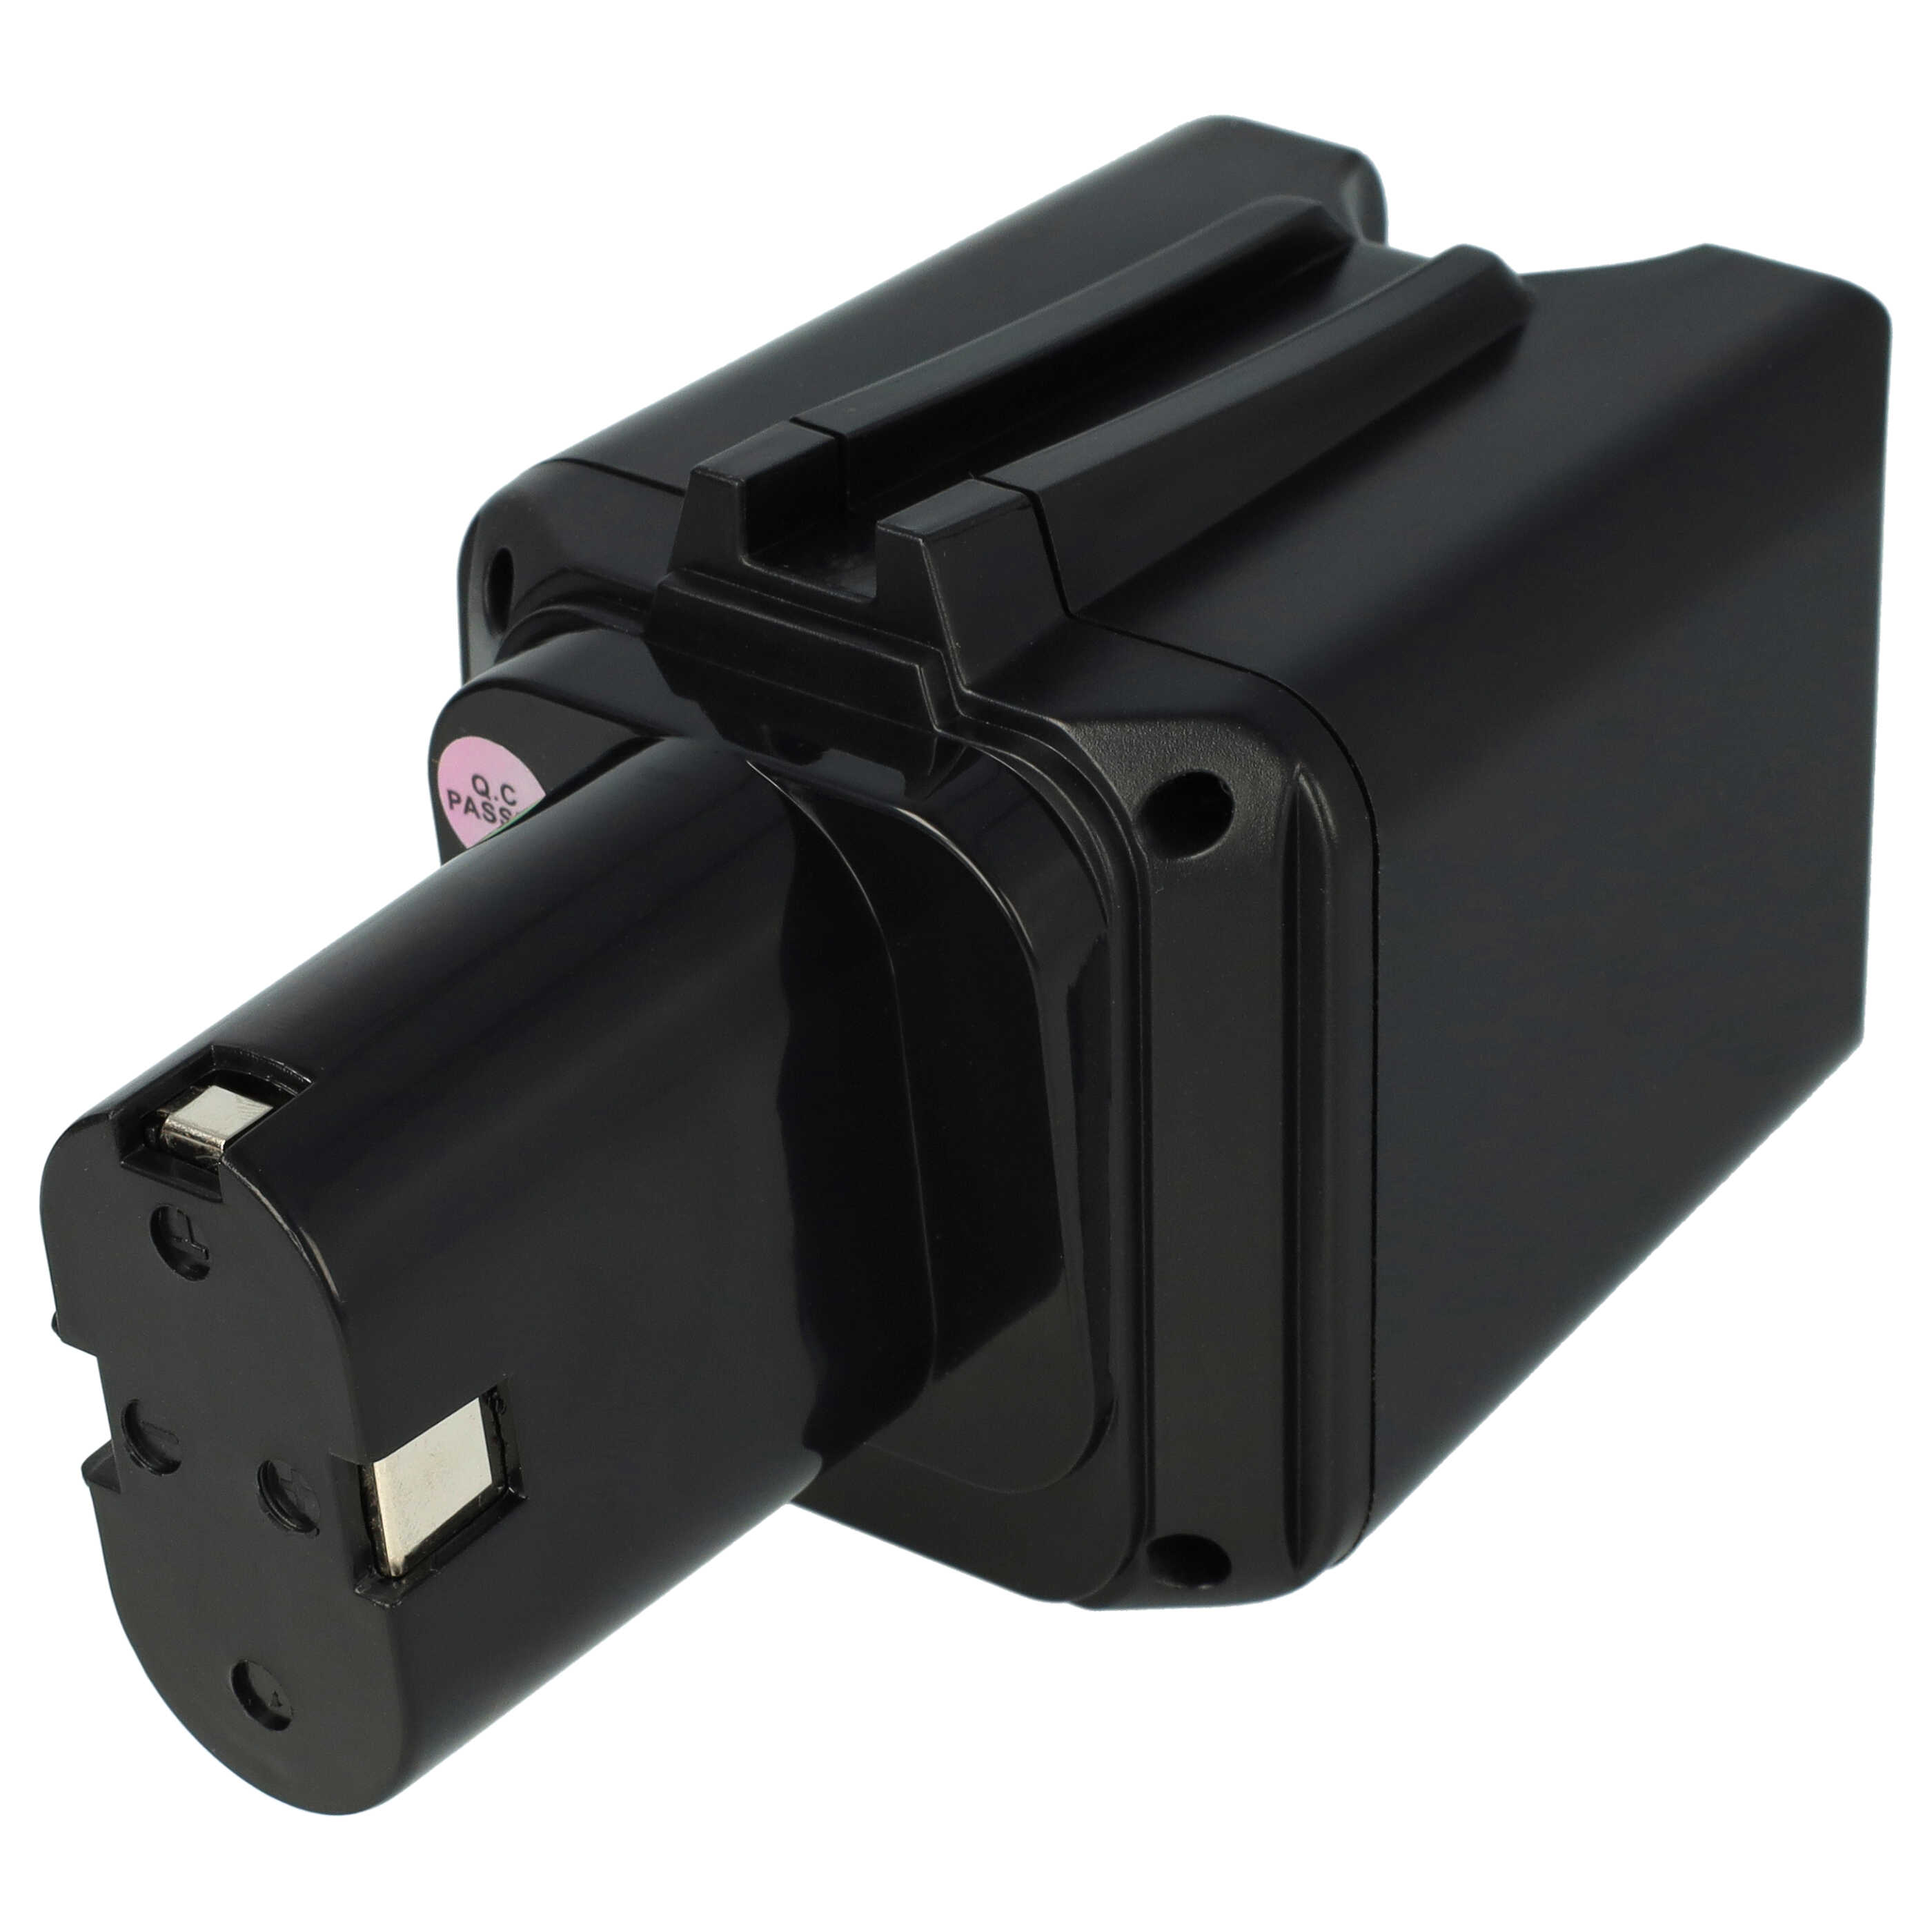 Electric Power Tool Battery Replaces Bosch 2 607 355 014, 2 607 335 180, 2 607 335 021 - 1500 mAh, 12 V, NiMH